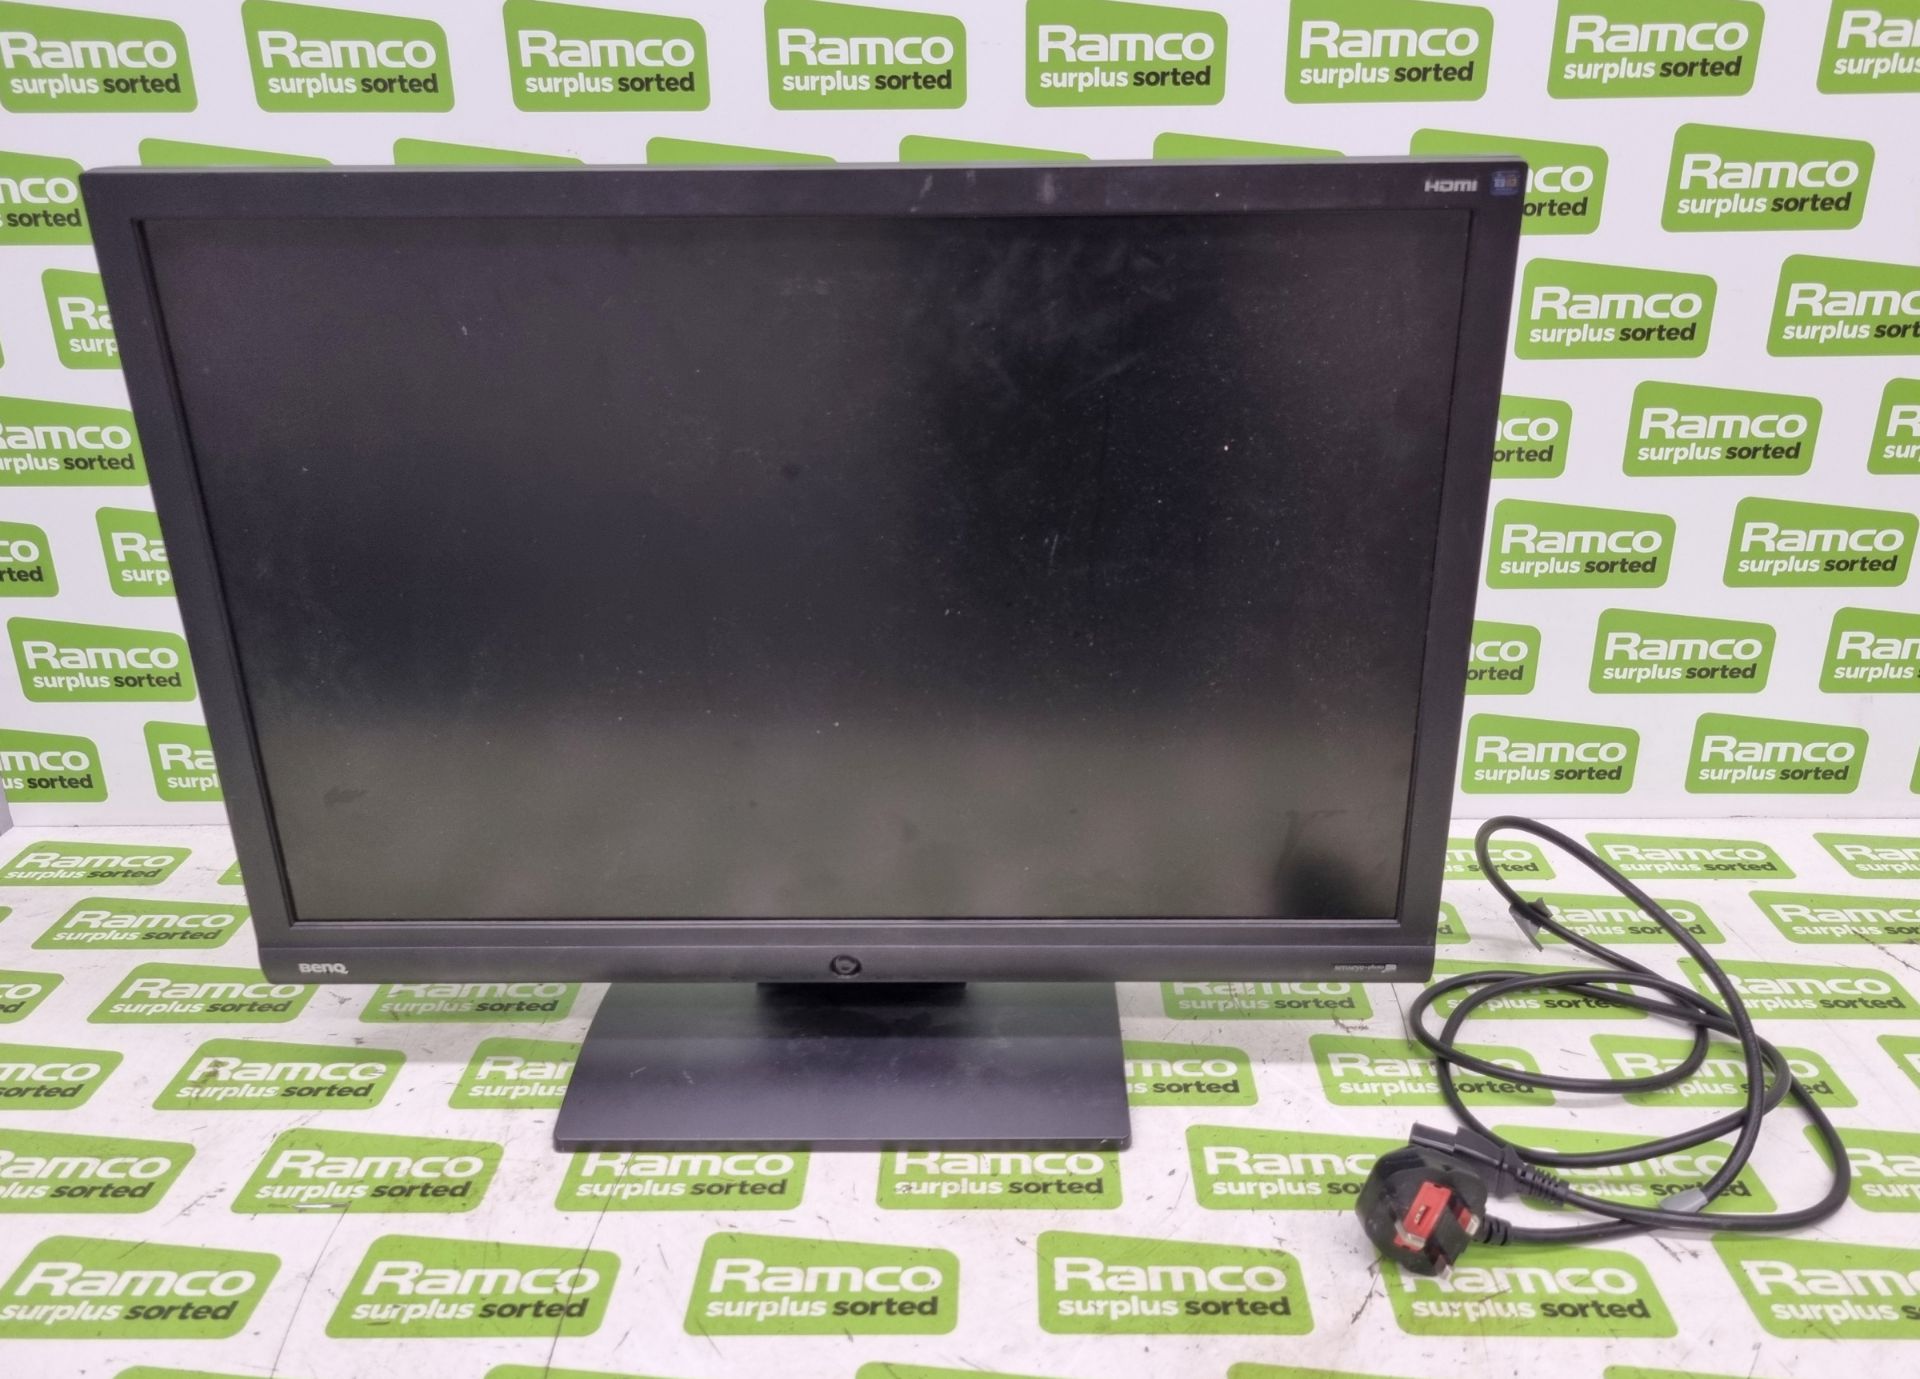 BenQ G2400W 24 inch LCD monitor with flight case - Image 5 of 6